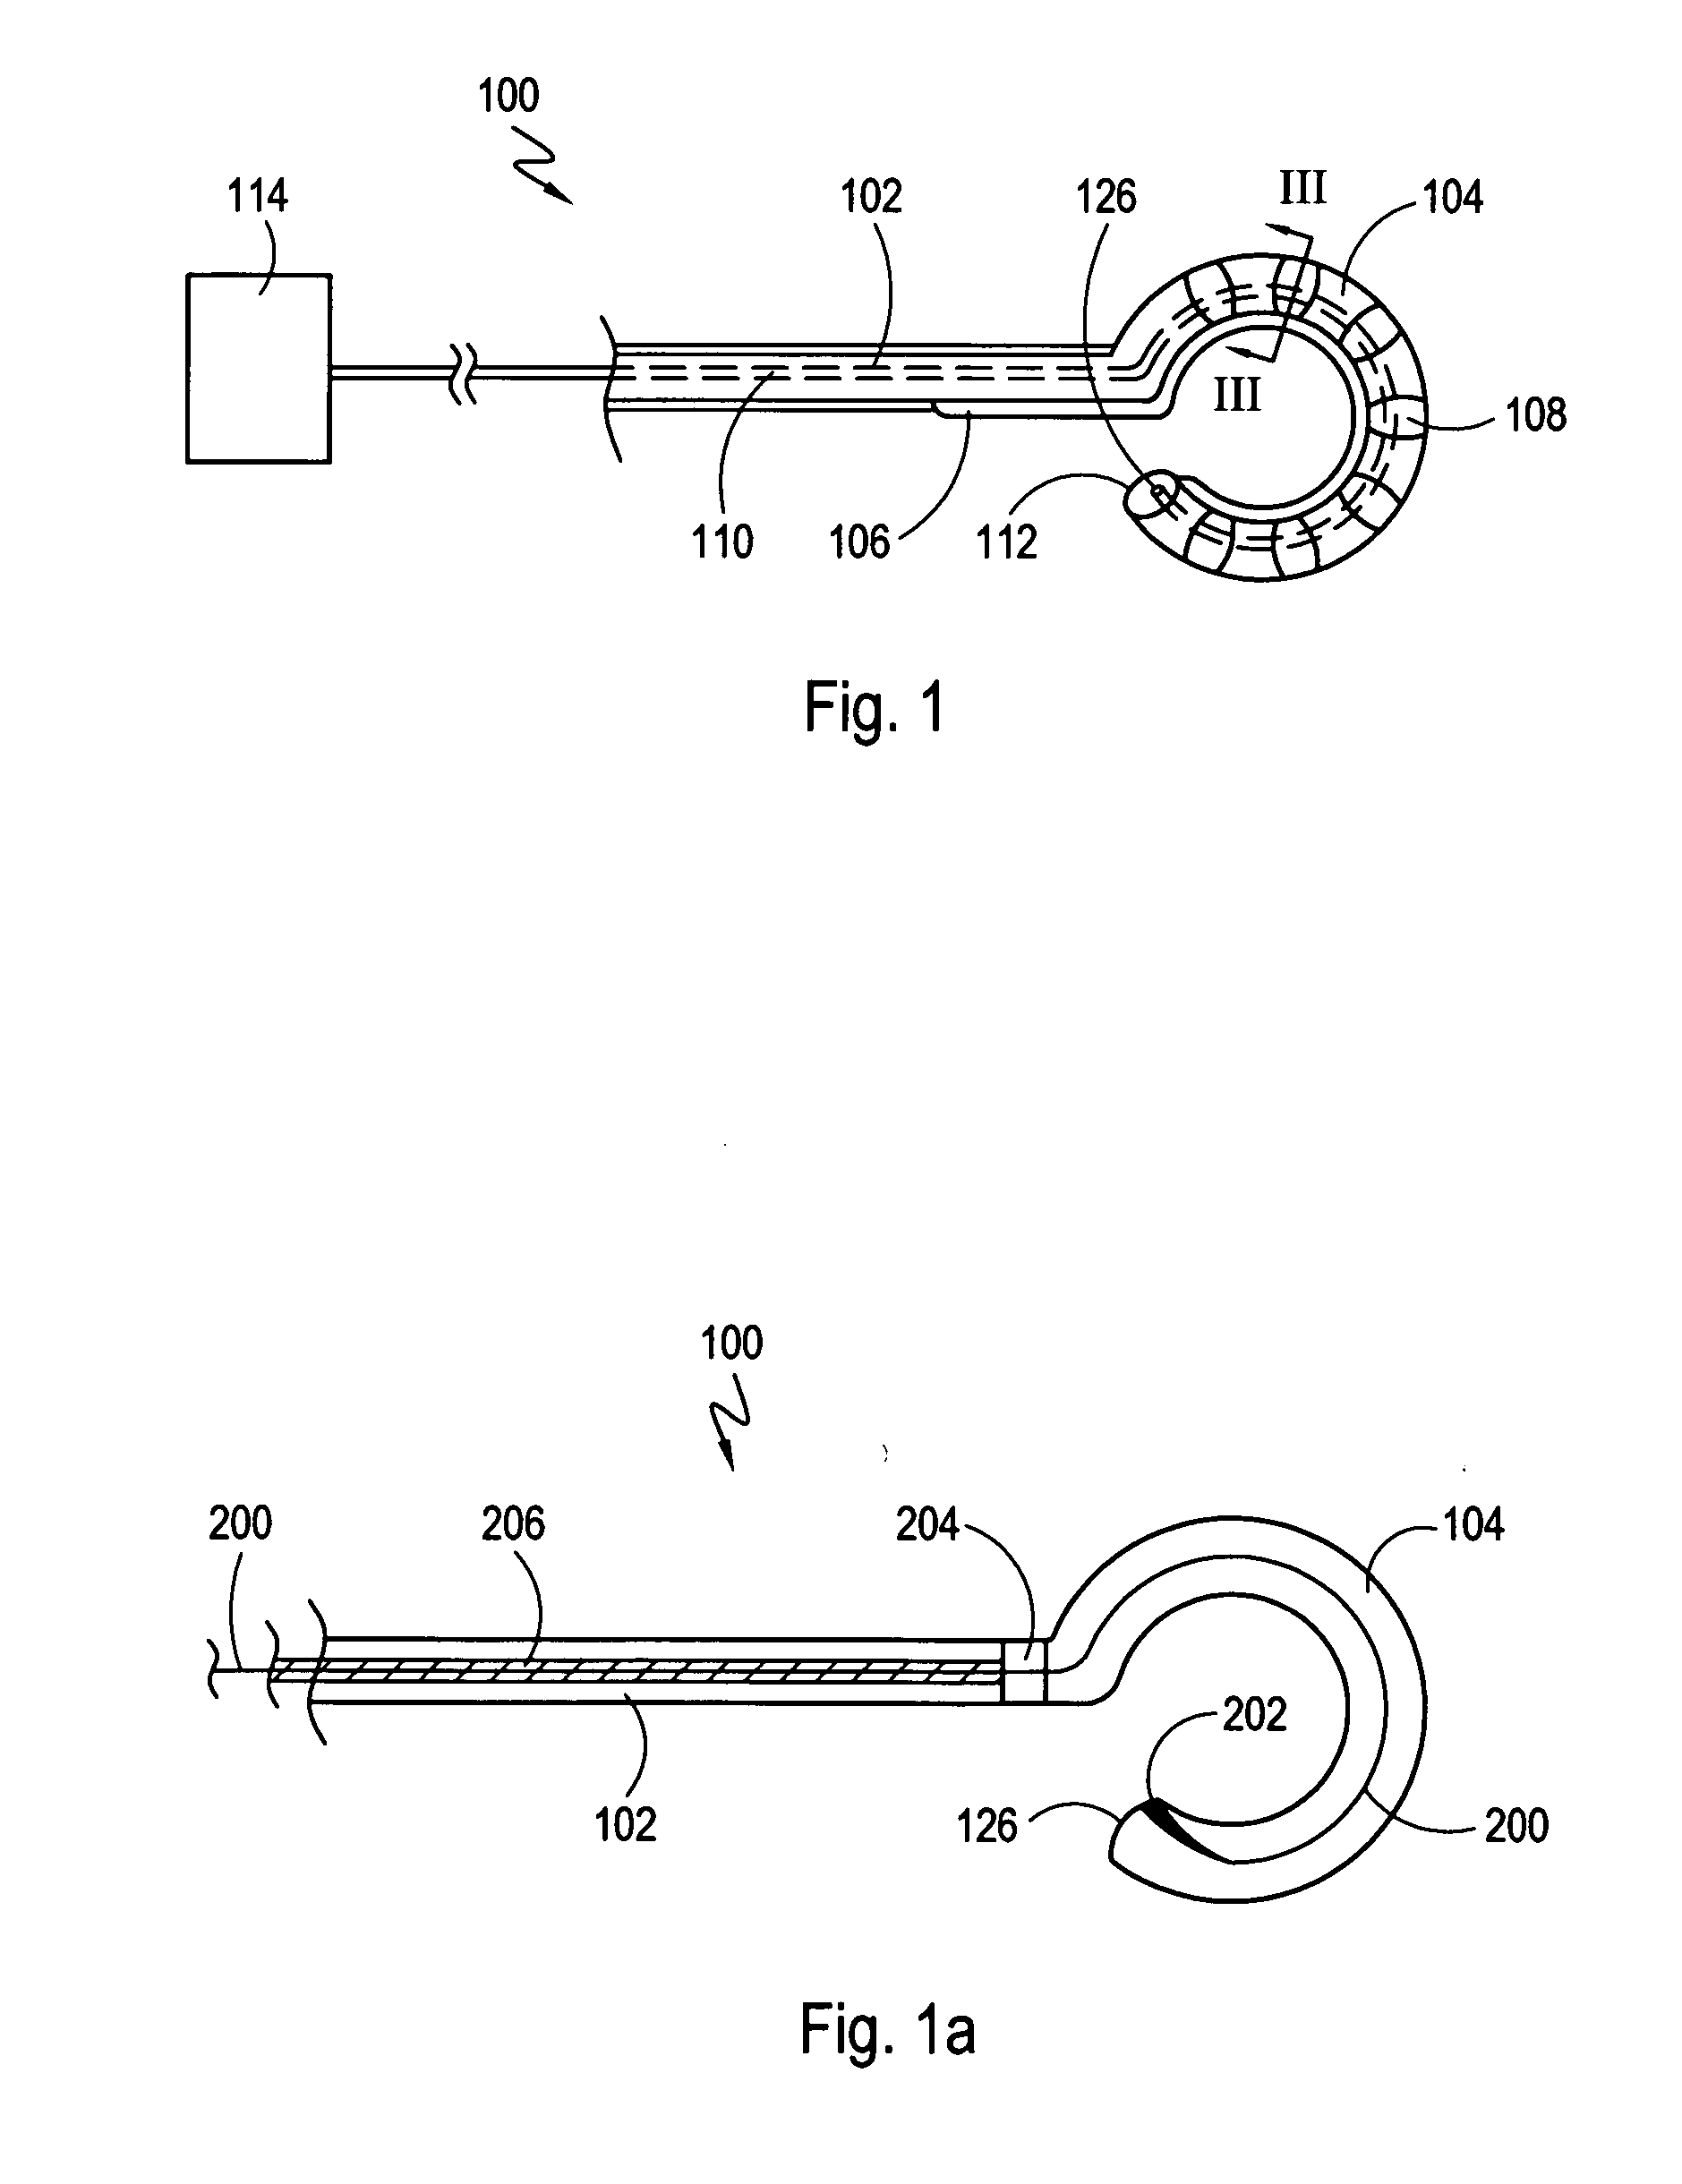 Cryoablation systems and methods